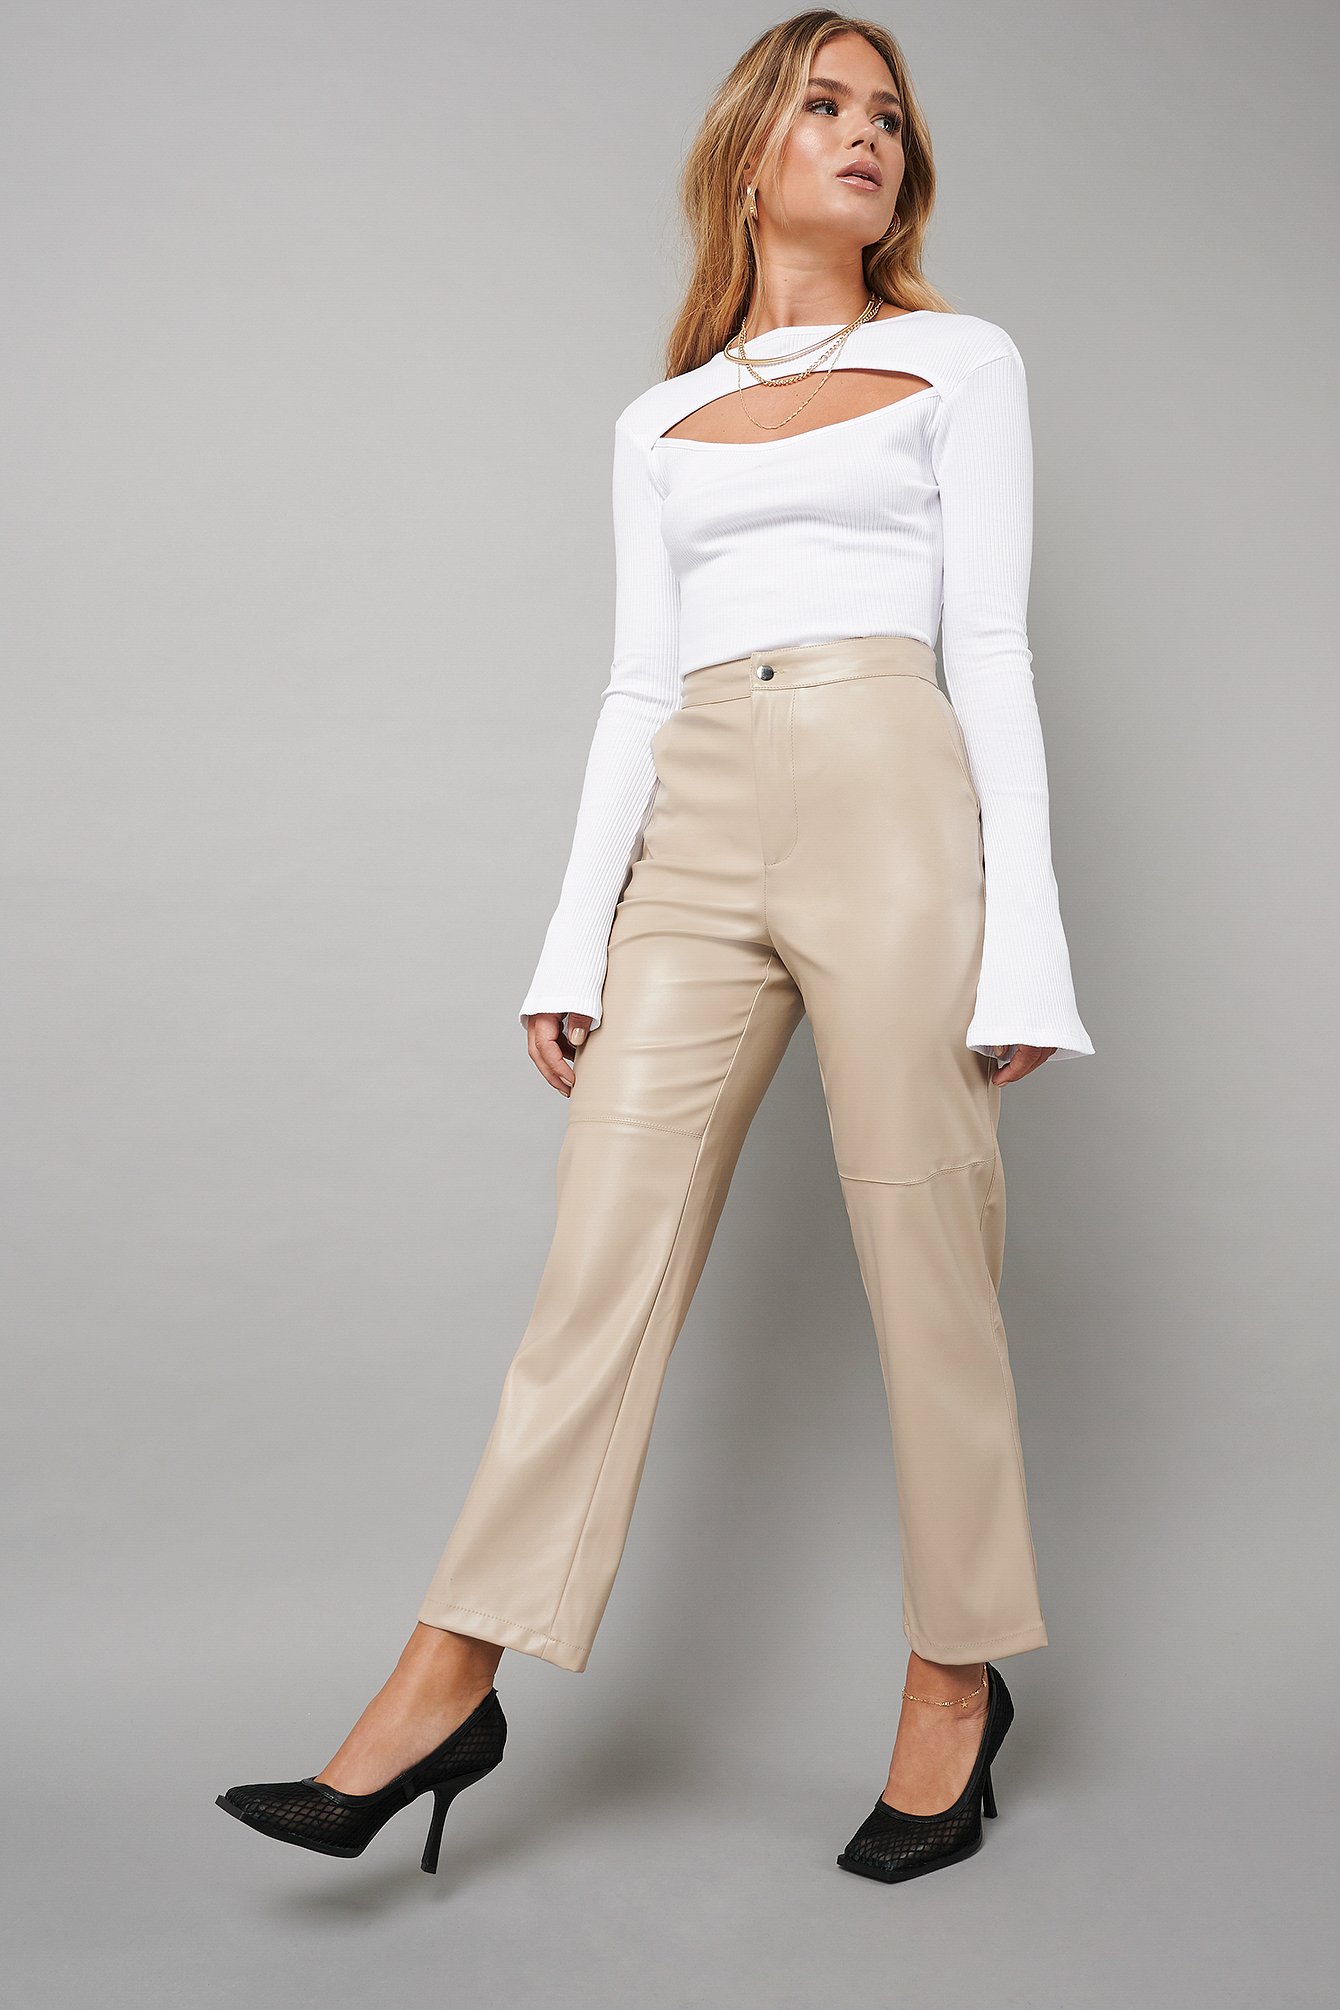 Beige Straight Faux Leather Pants